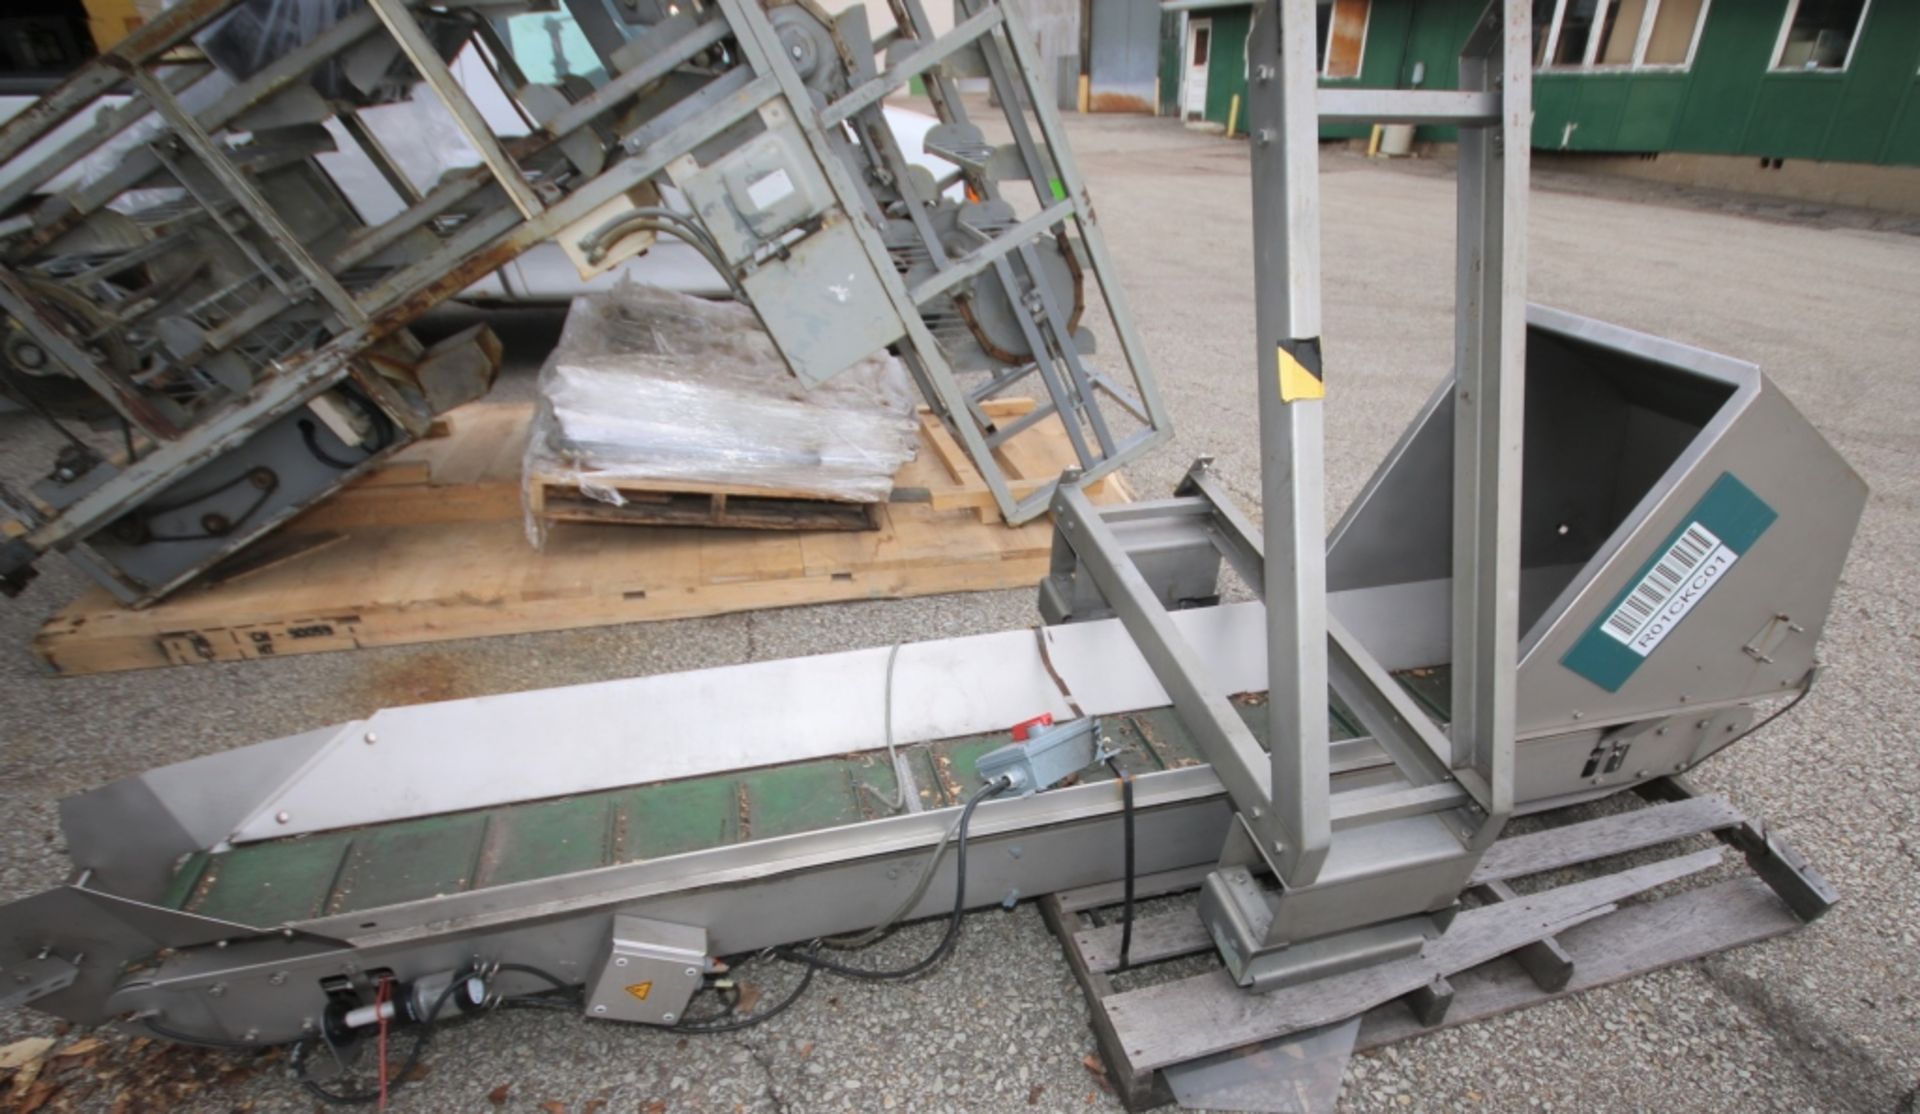 10 ft L S/S Power Inclined Conveyor with 9" W Belt, 20" x 24" Bottom Hinged Hopper with Legs (INV#